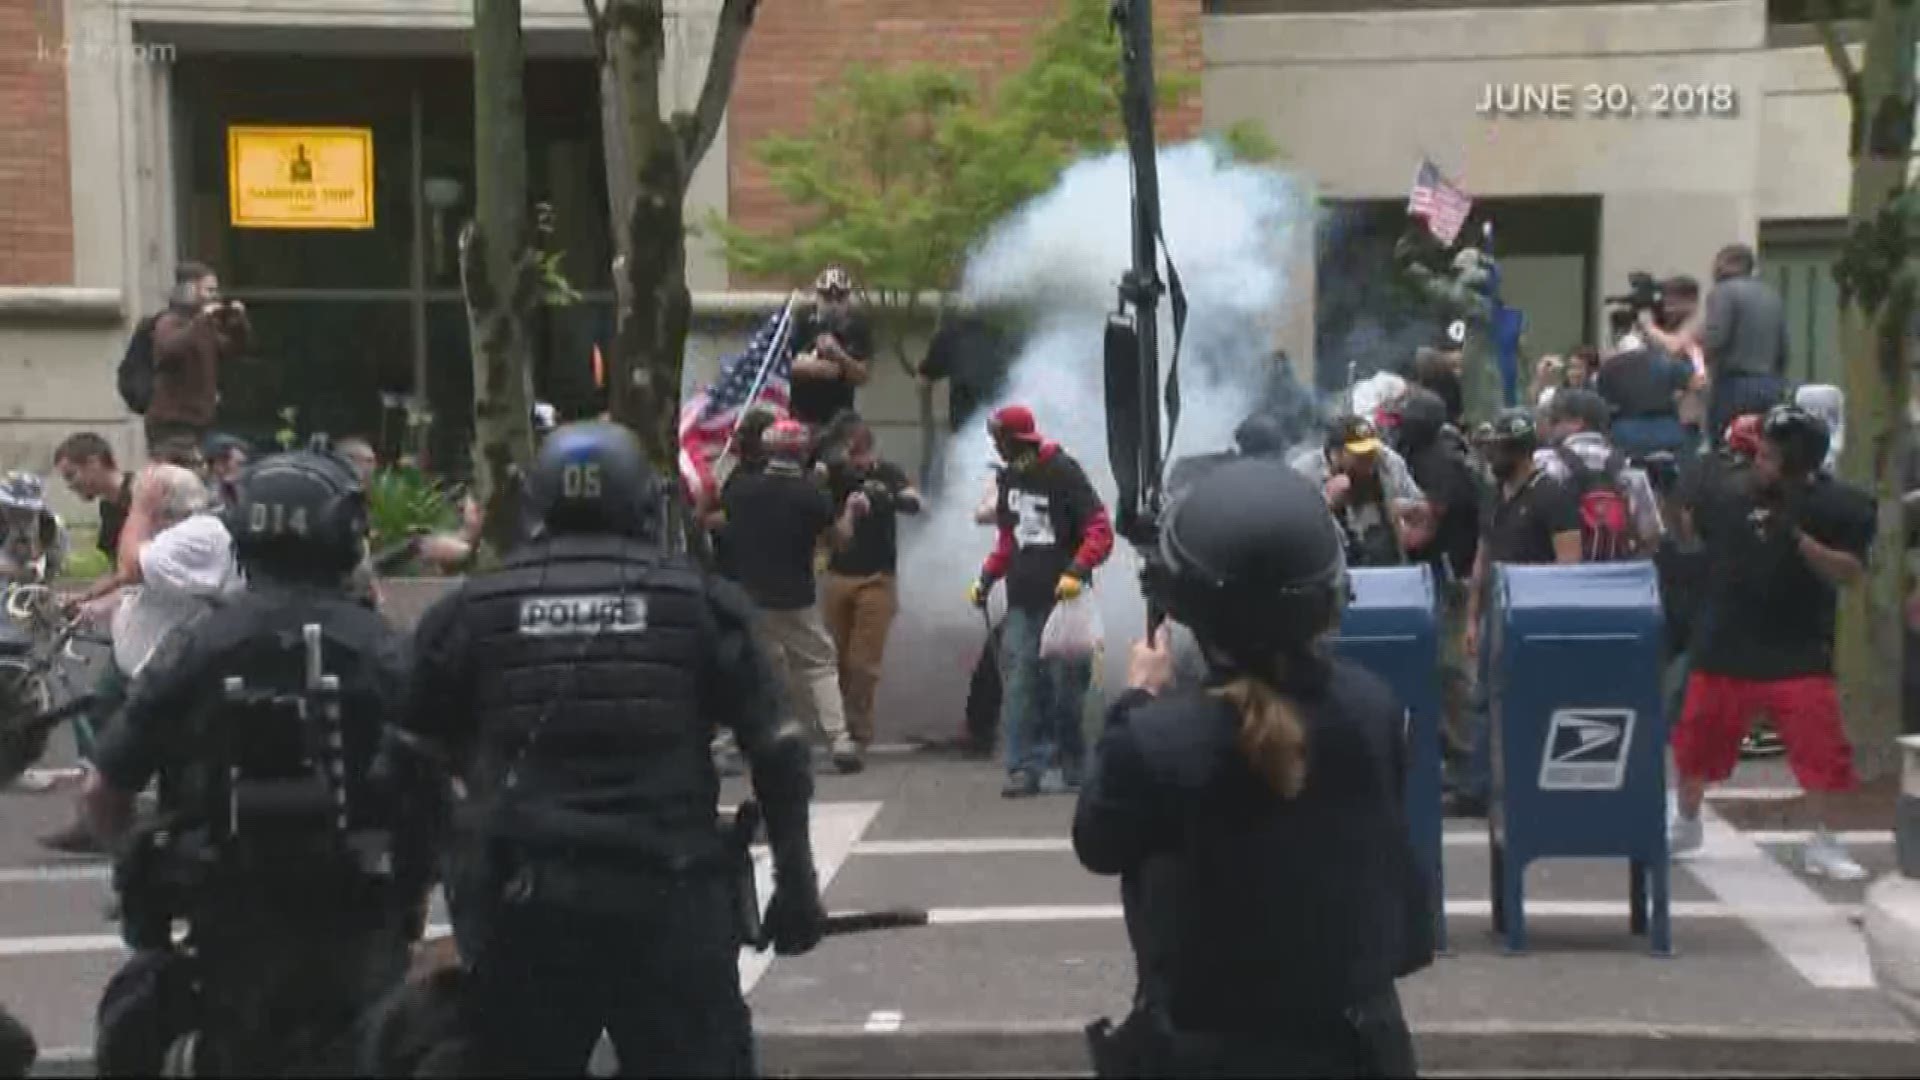 Police are reminding demonstrators that weapons are not allowed in city parks, and acts of violence will lead to immediate arrest during Saturday's Patriot Prayer rally and counter-protests.